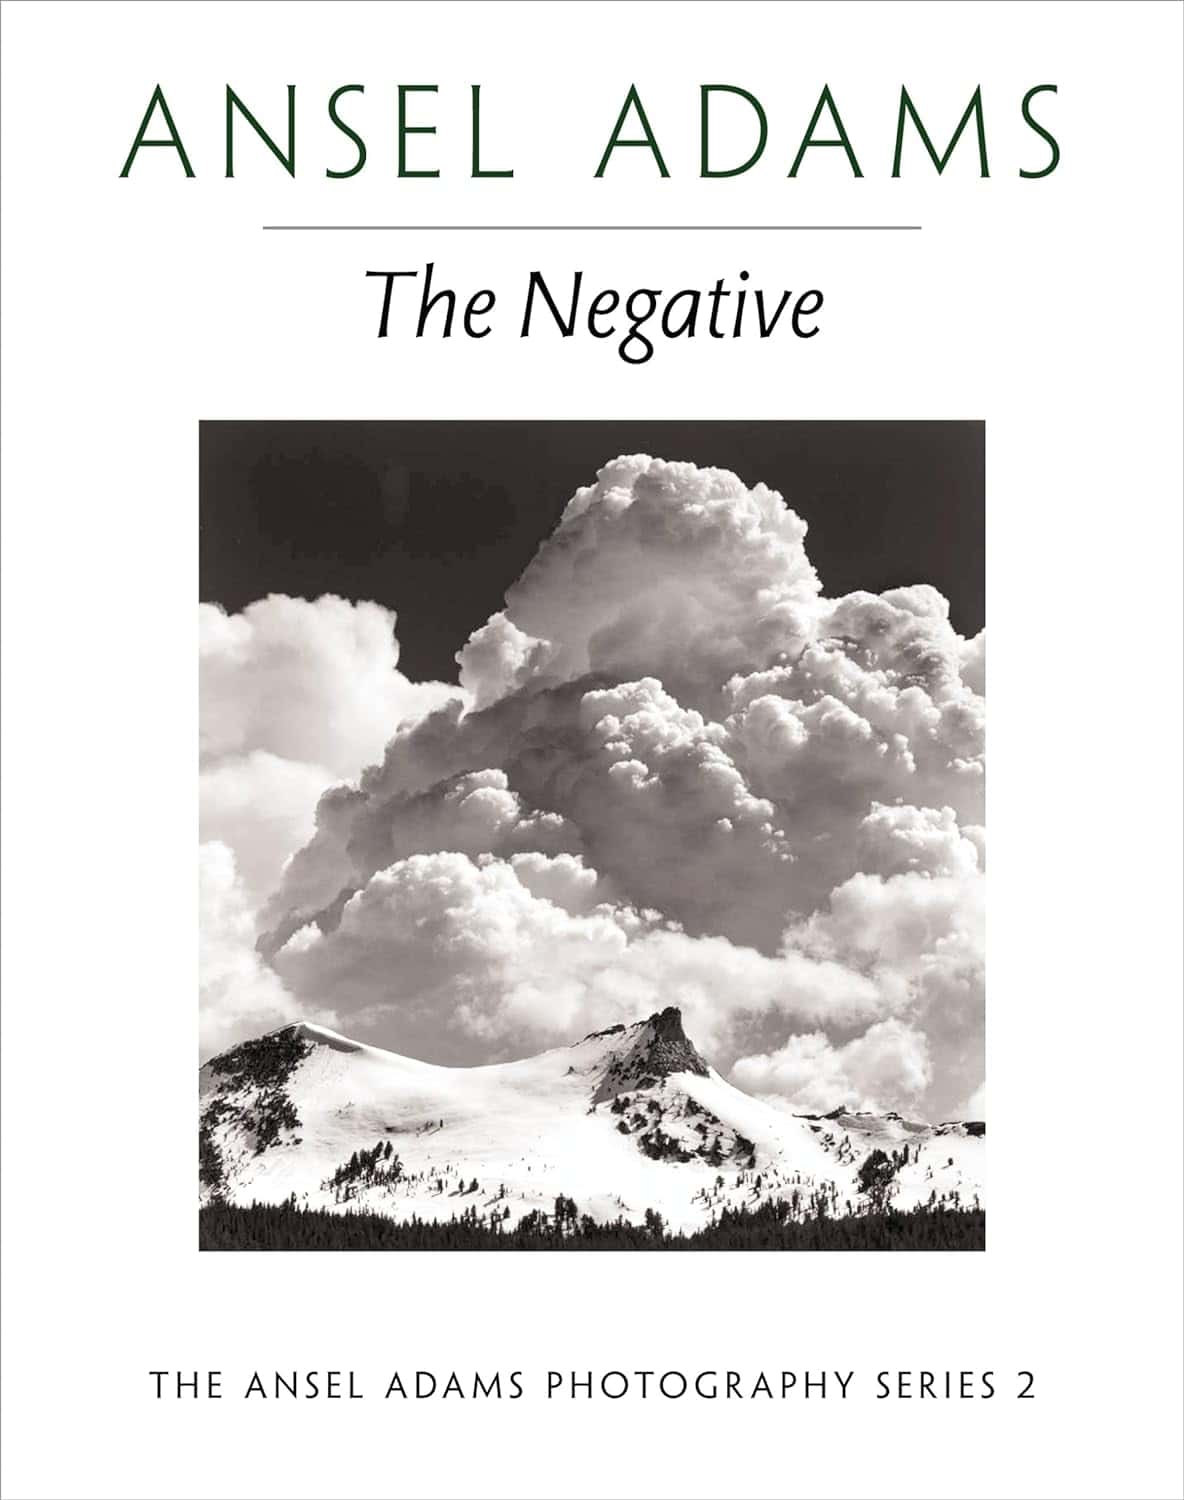 The Negative by Ansel Adams